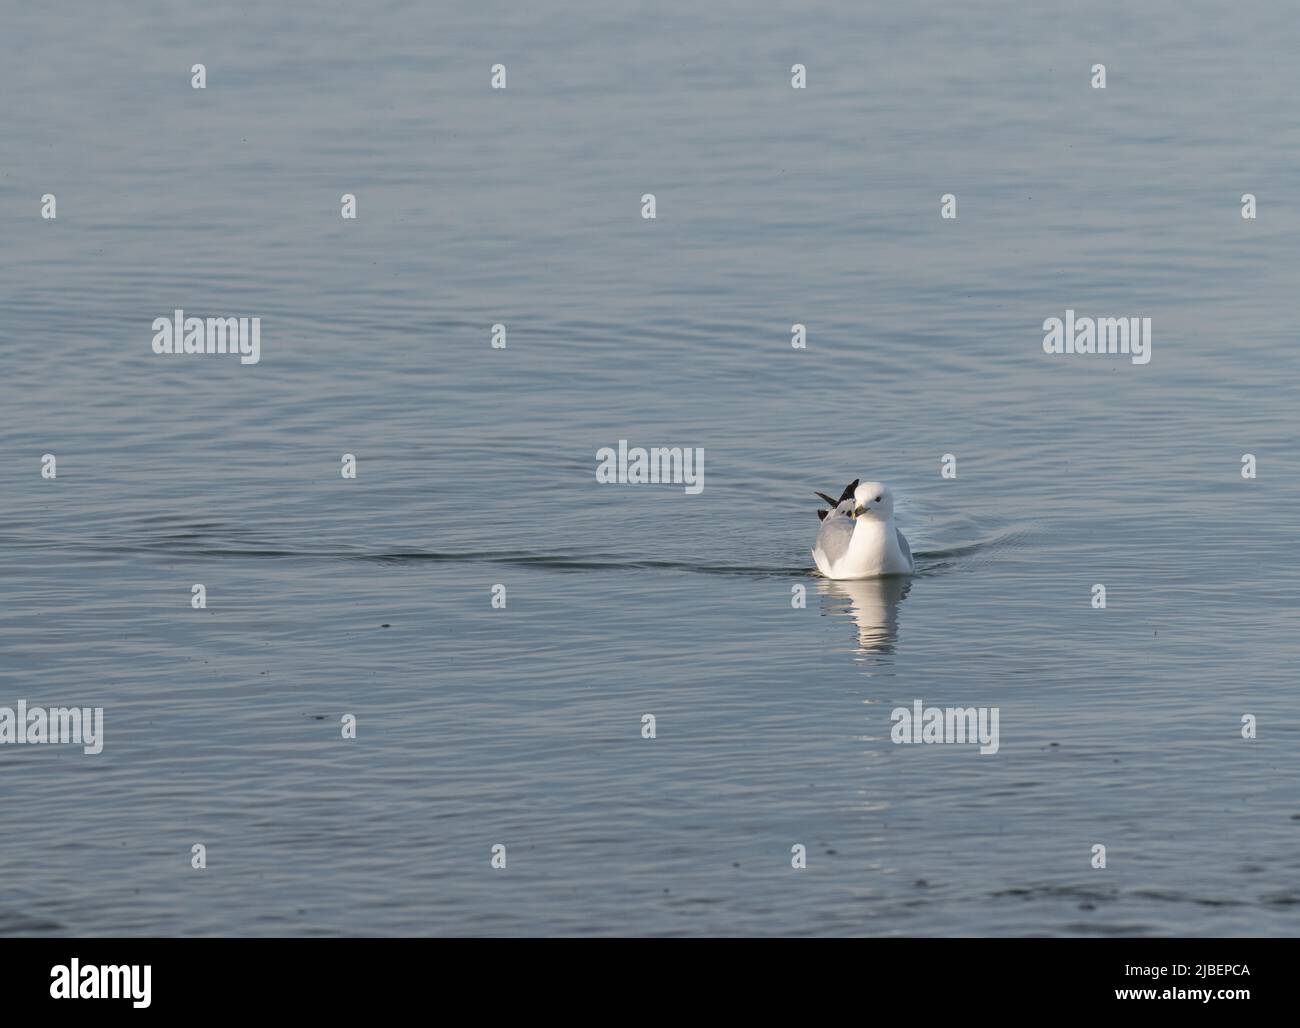 one isolated  grey and white seagull bird swimming in calm waters of lake Ontario Canada shot from shoreline on beach horizontal format room for type Stock Photo